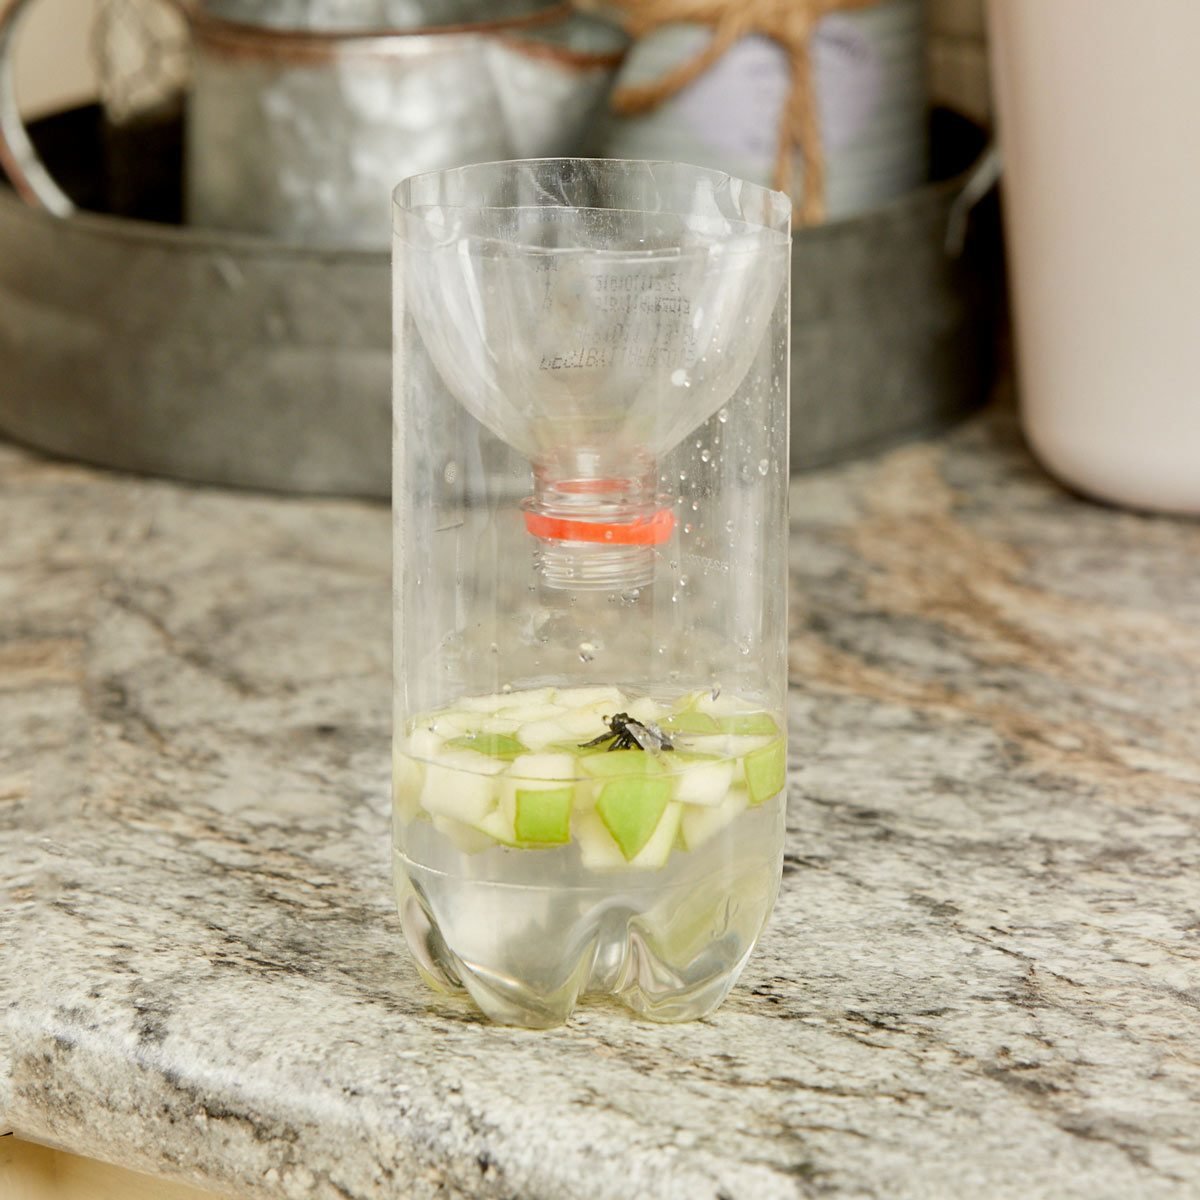 How to Make a Simple DIY Fly Trap